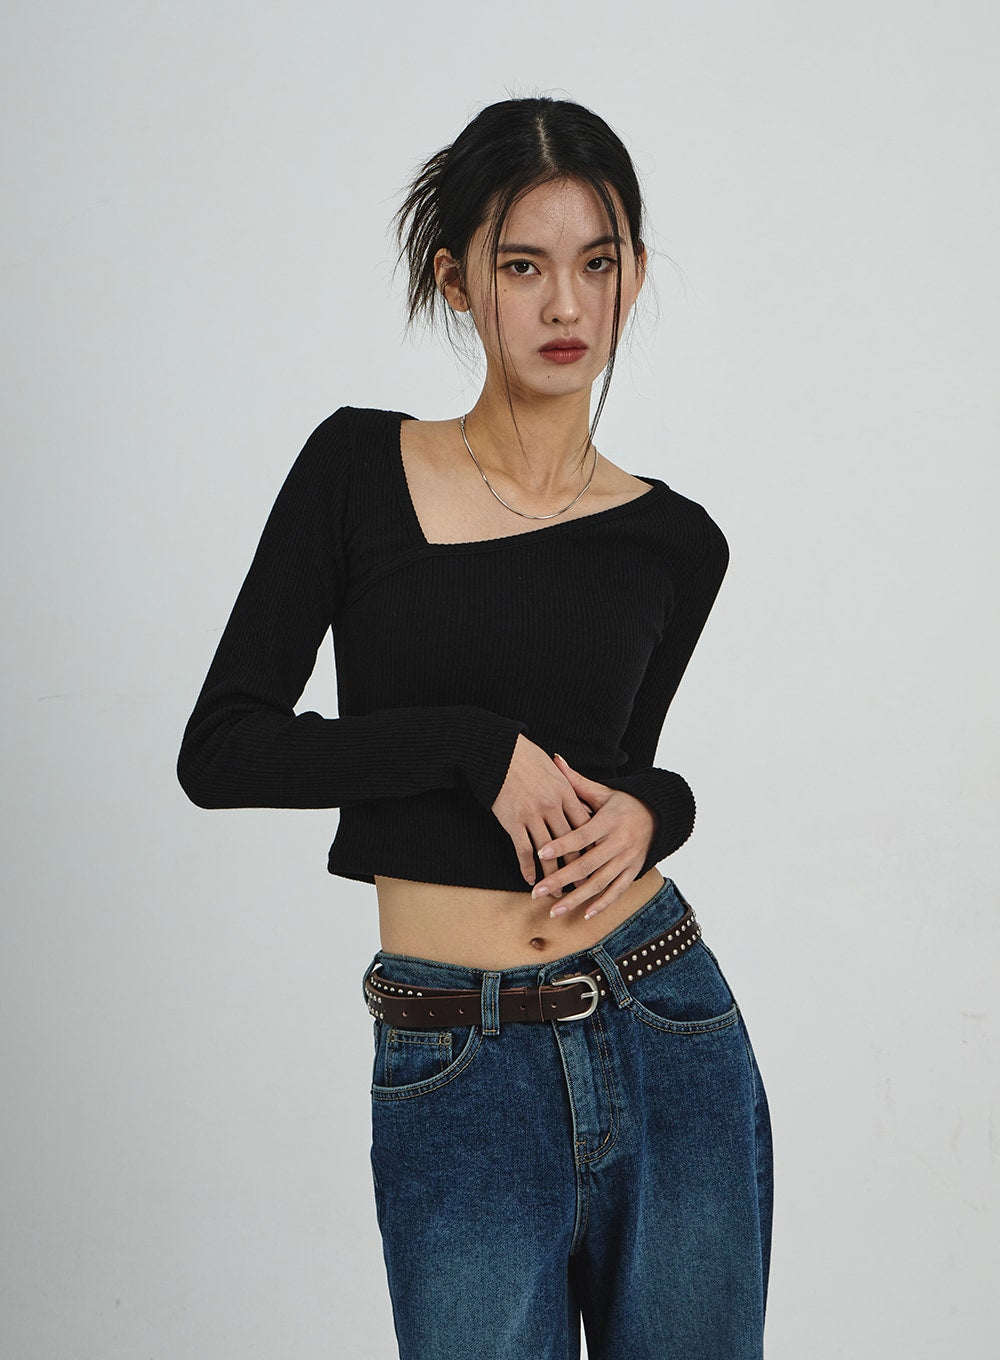 Wild Fable Women's Cropped Tops On Sale Up To 90% Off Retail